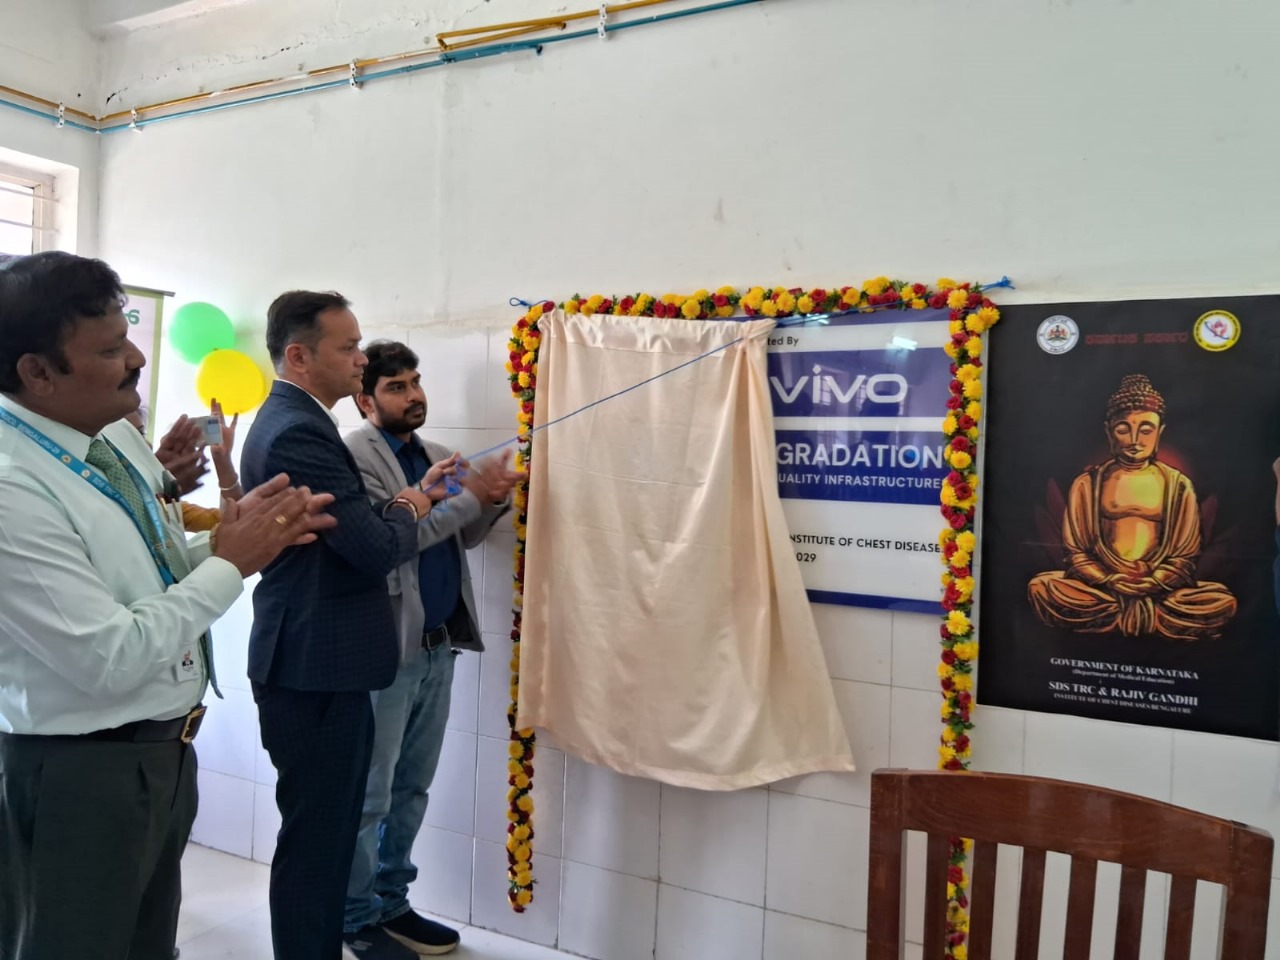 Aahwahan Foundation Partners with VIVO CSR team for Upgradation of Rajiv Gandhi Institute of Chest Diseases